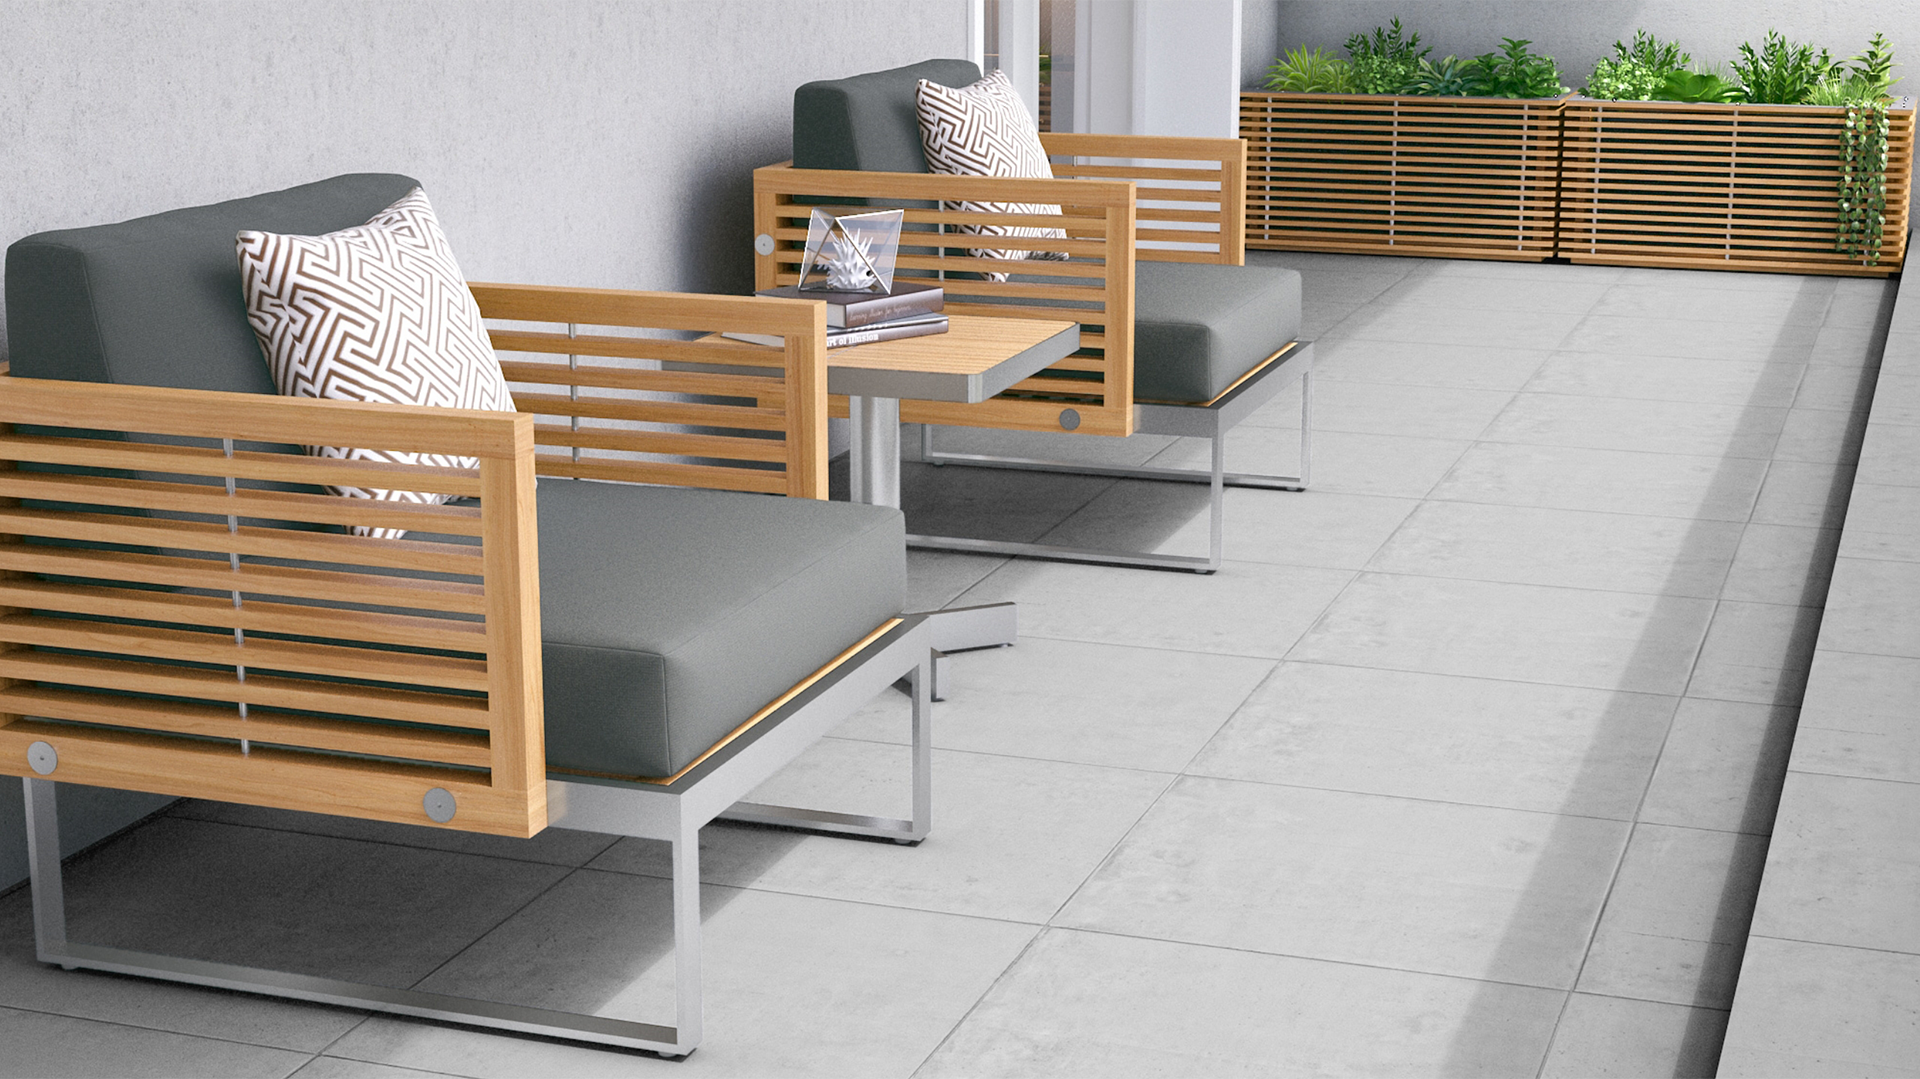 Lounge Design for Your Small Balcony